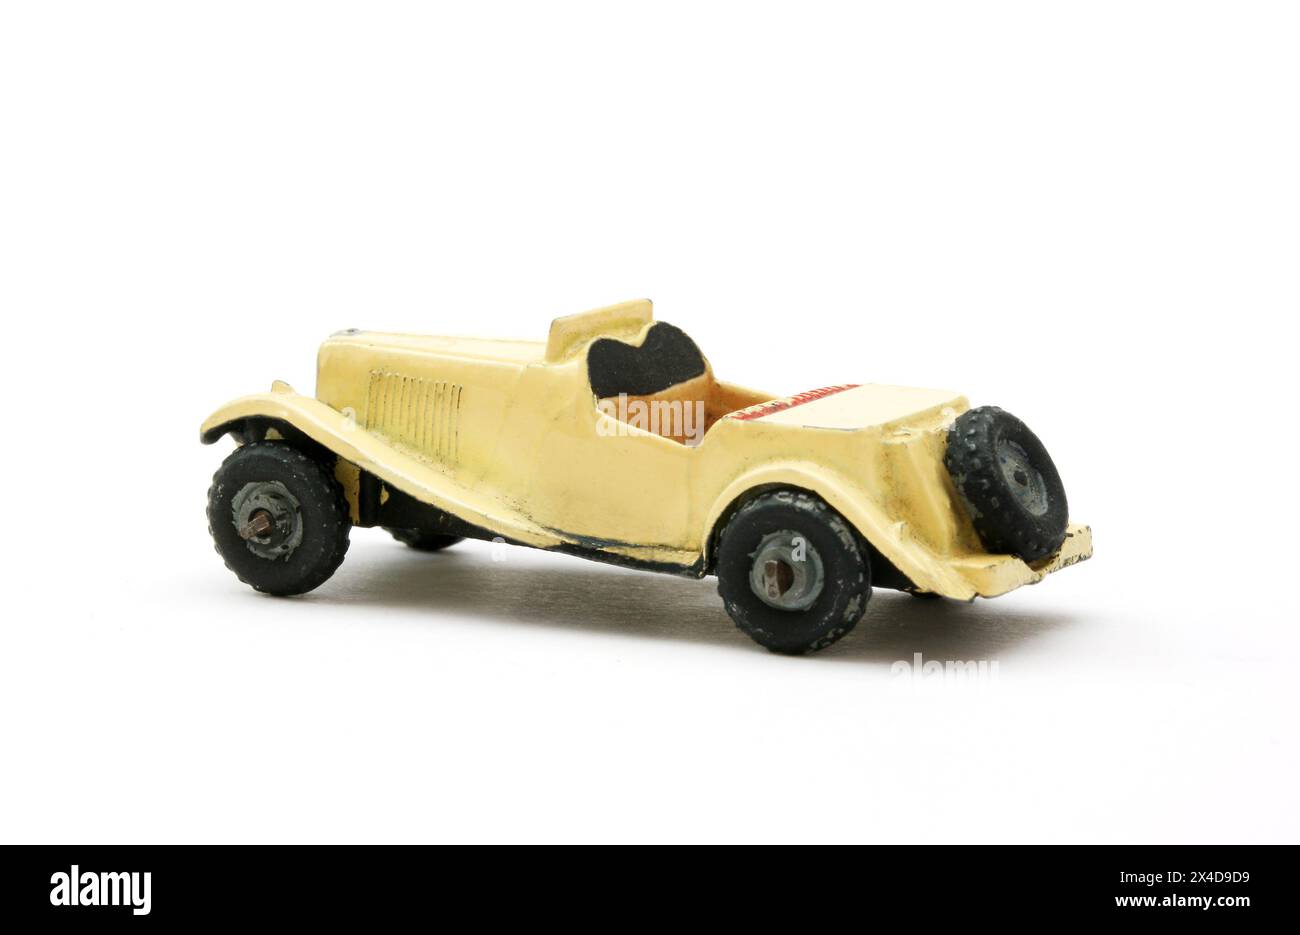 Matchbox MGA Classic Sports car toy scale model Stock Photo